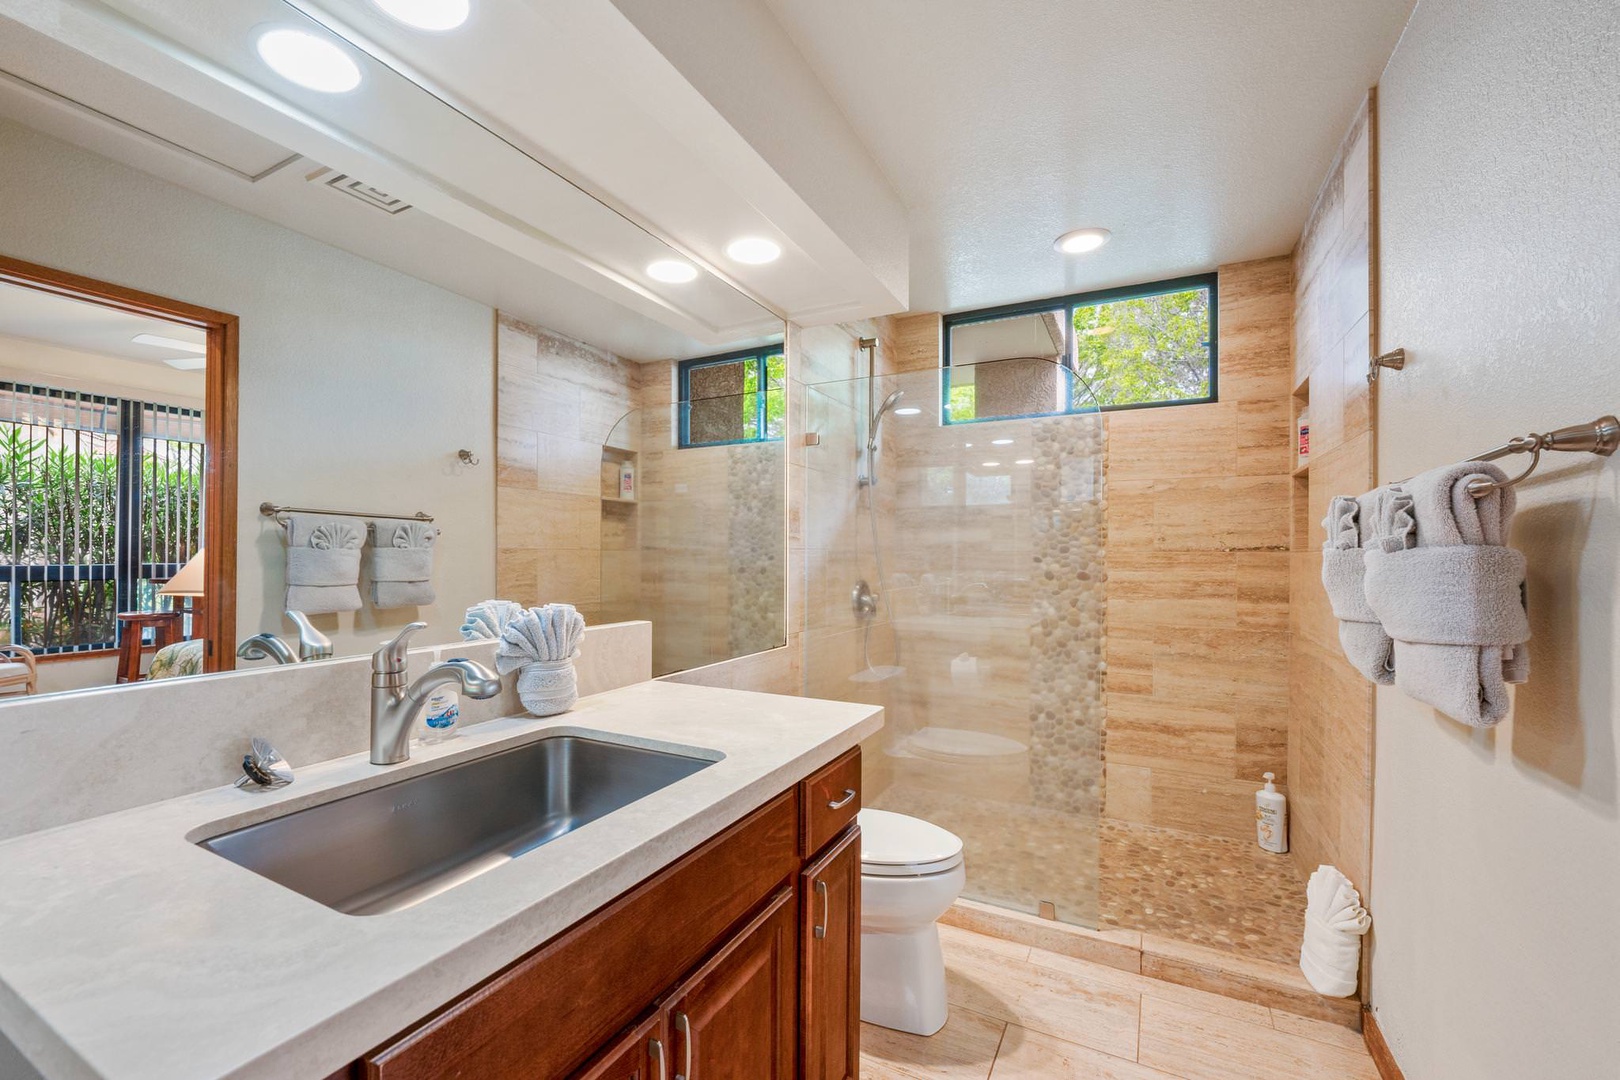 Full bathroom with standing shower